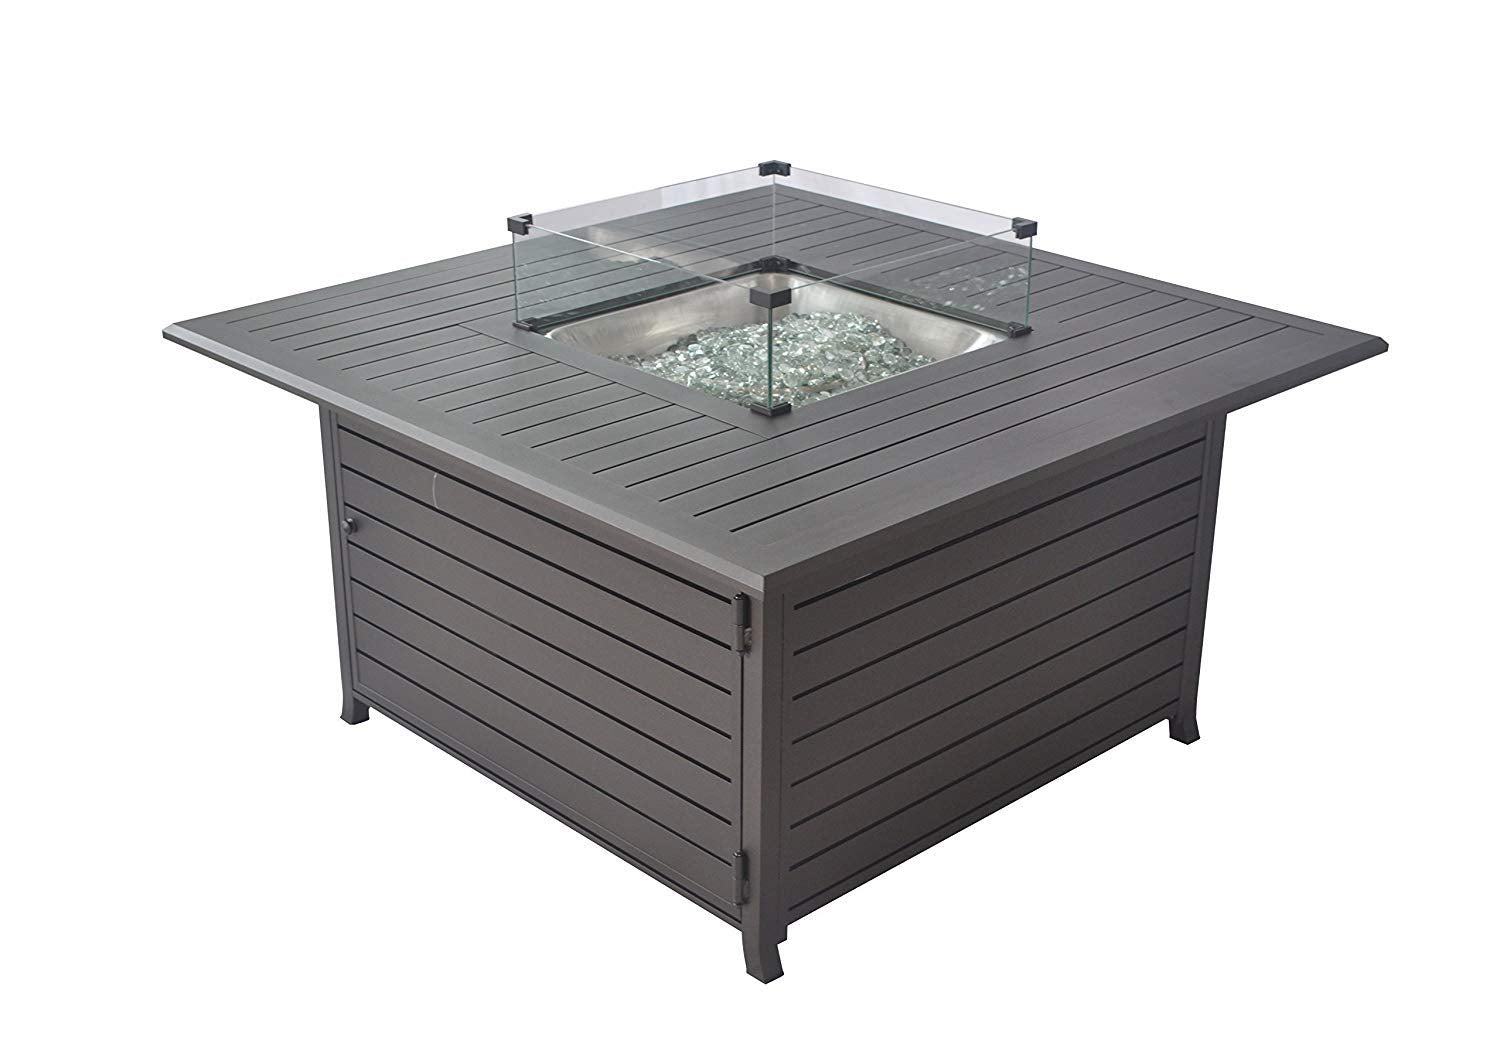 45 Inch 50,000 Btu Square Propane Gas Fire Pit Table with w/ Glass Wind Guard - Mocha Brown-Boyel Living